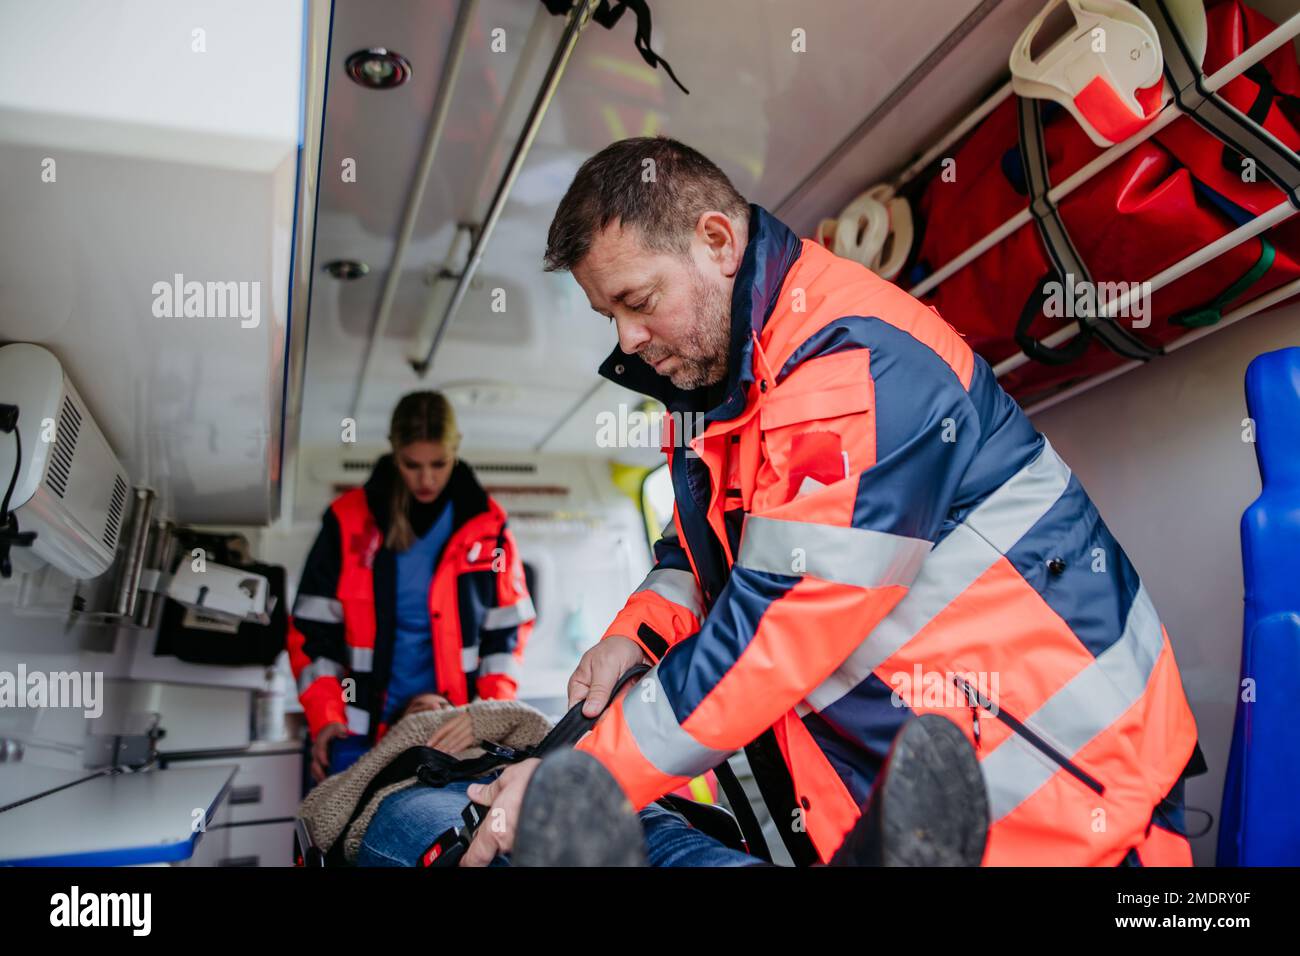 Rescuers taking care of patient, preparing her for transport. Stock Photo